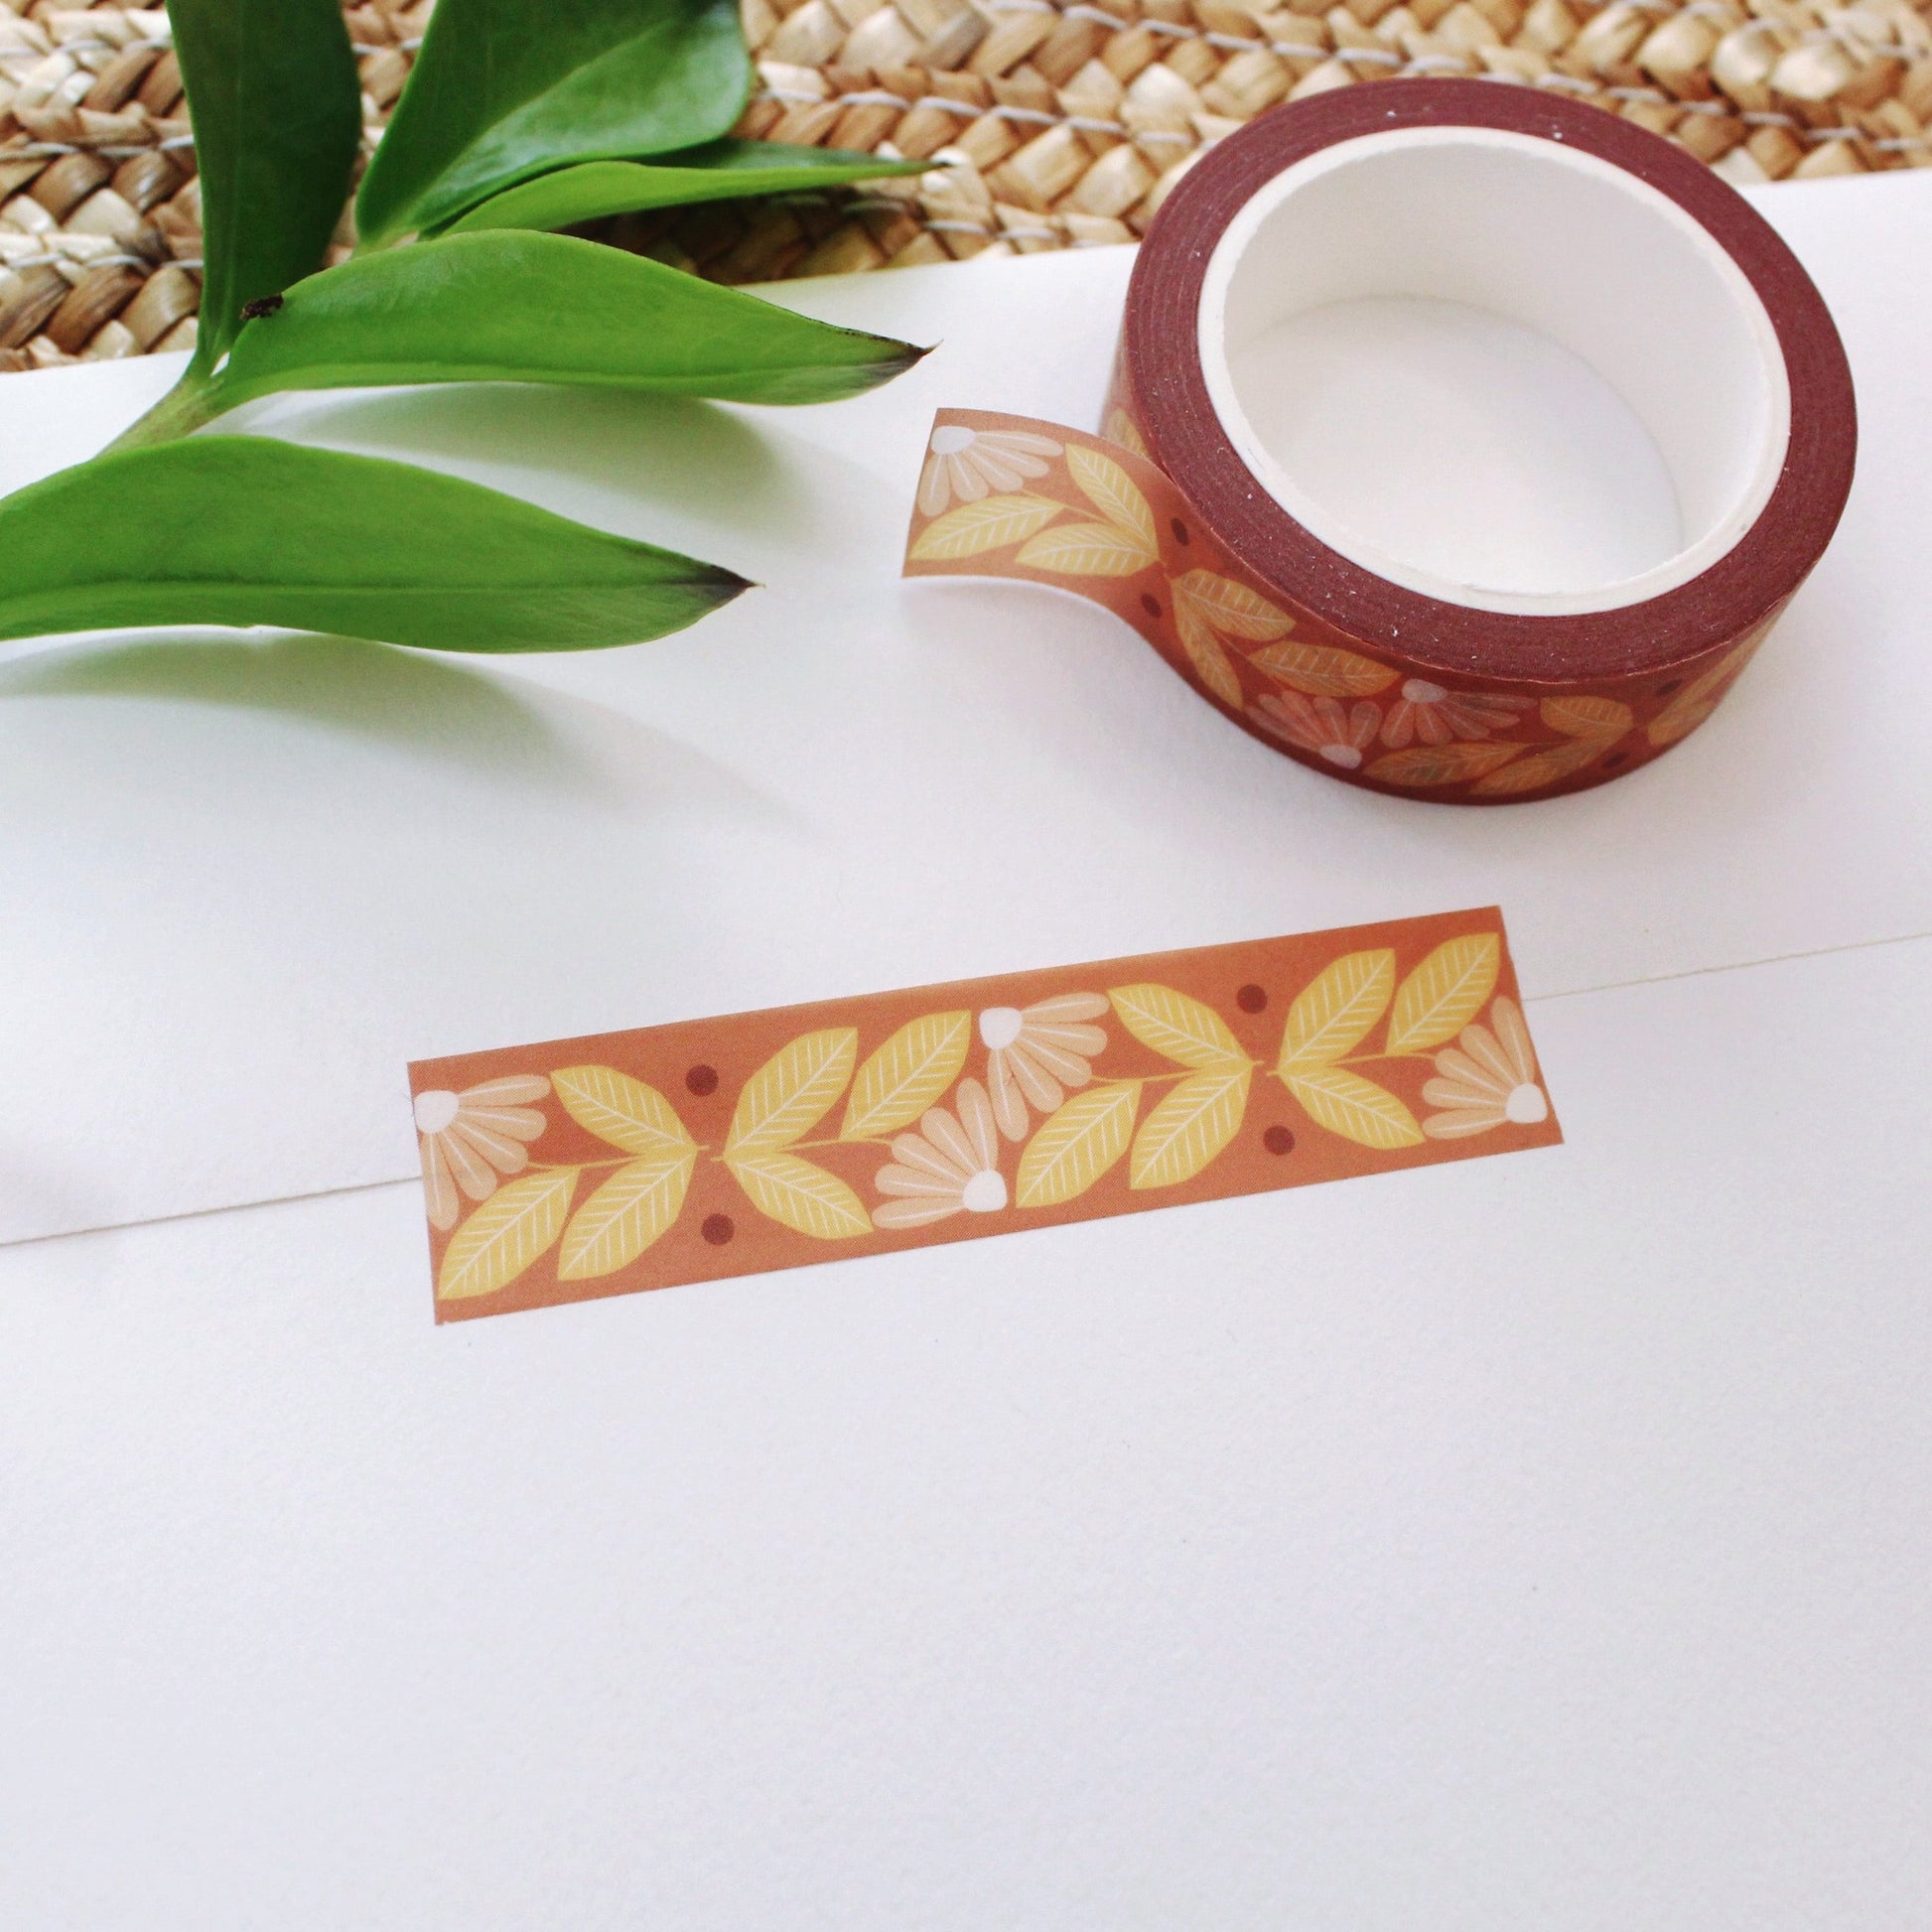 peach and yellow flower washi tape on a rust colored background.